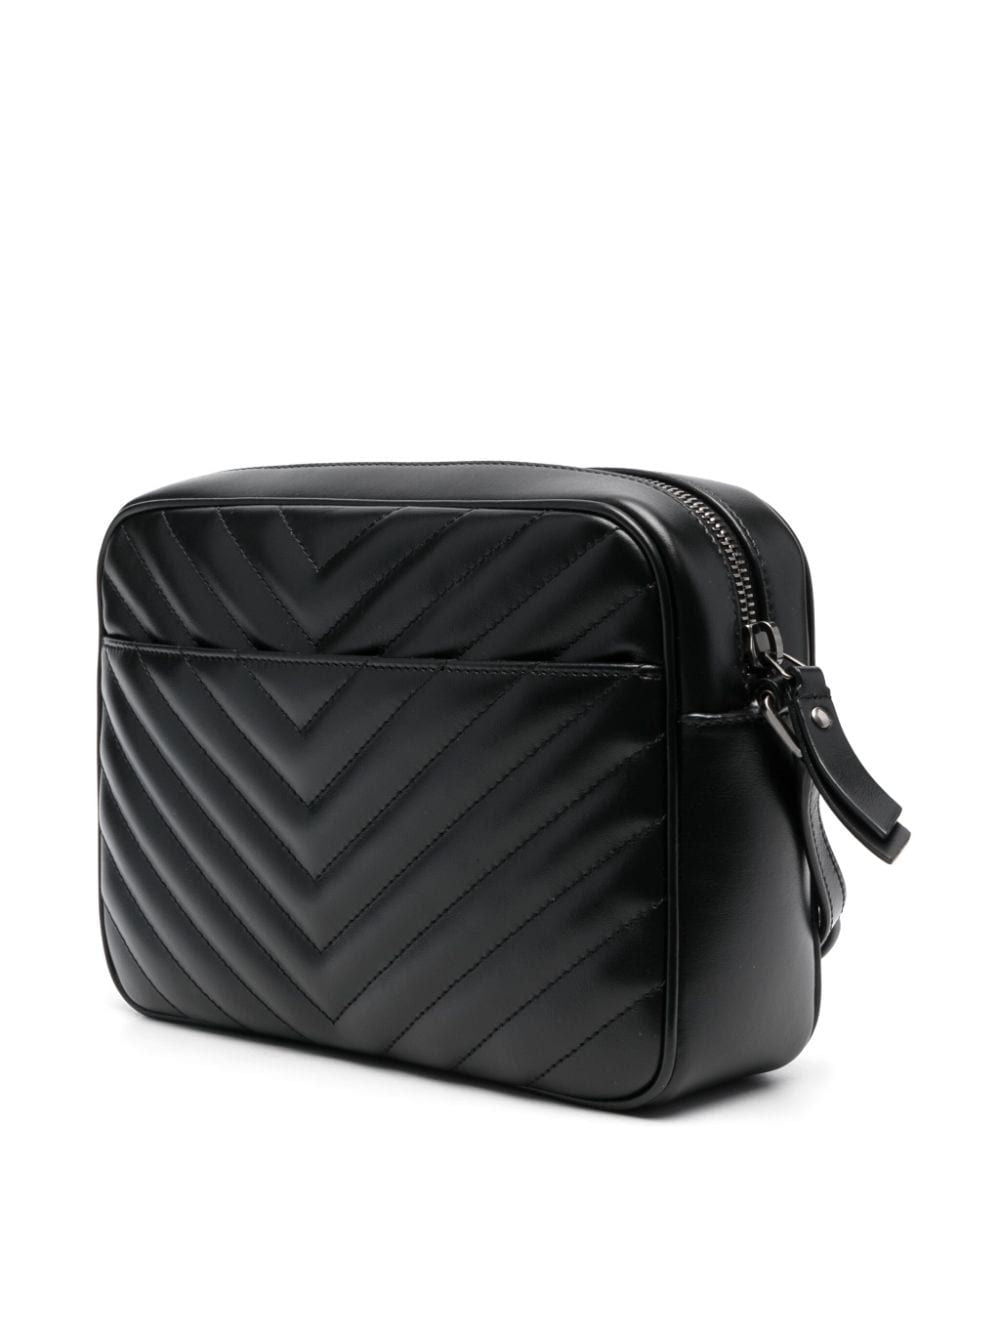 SAINT LAURENT Transform Your Everyday Look with this Luxurious Black Quilted Crossbody Handbag